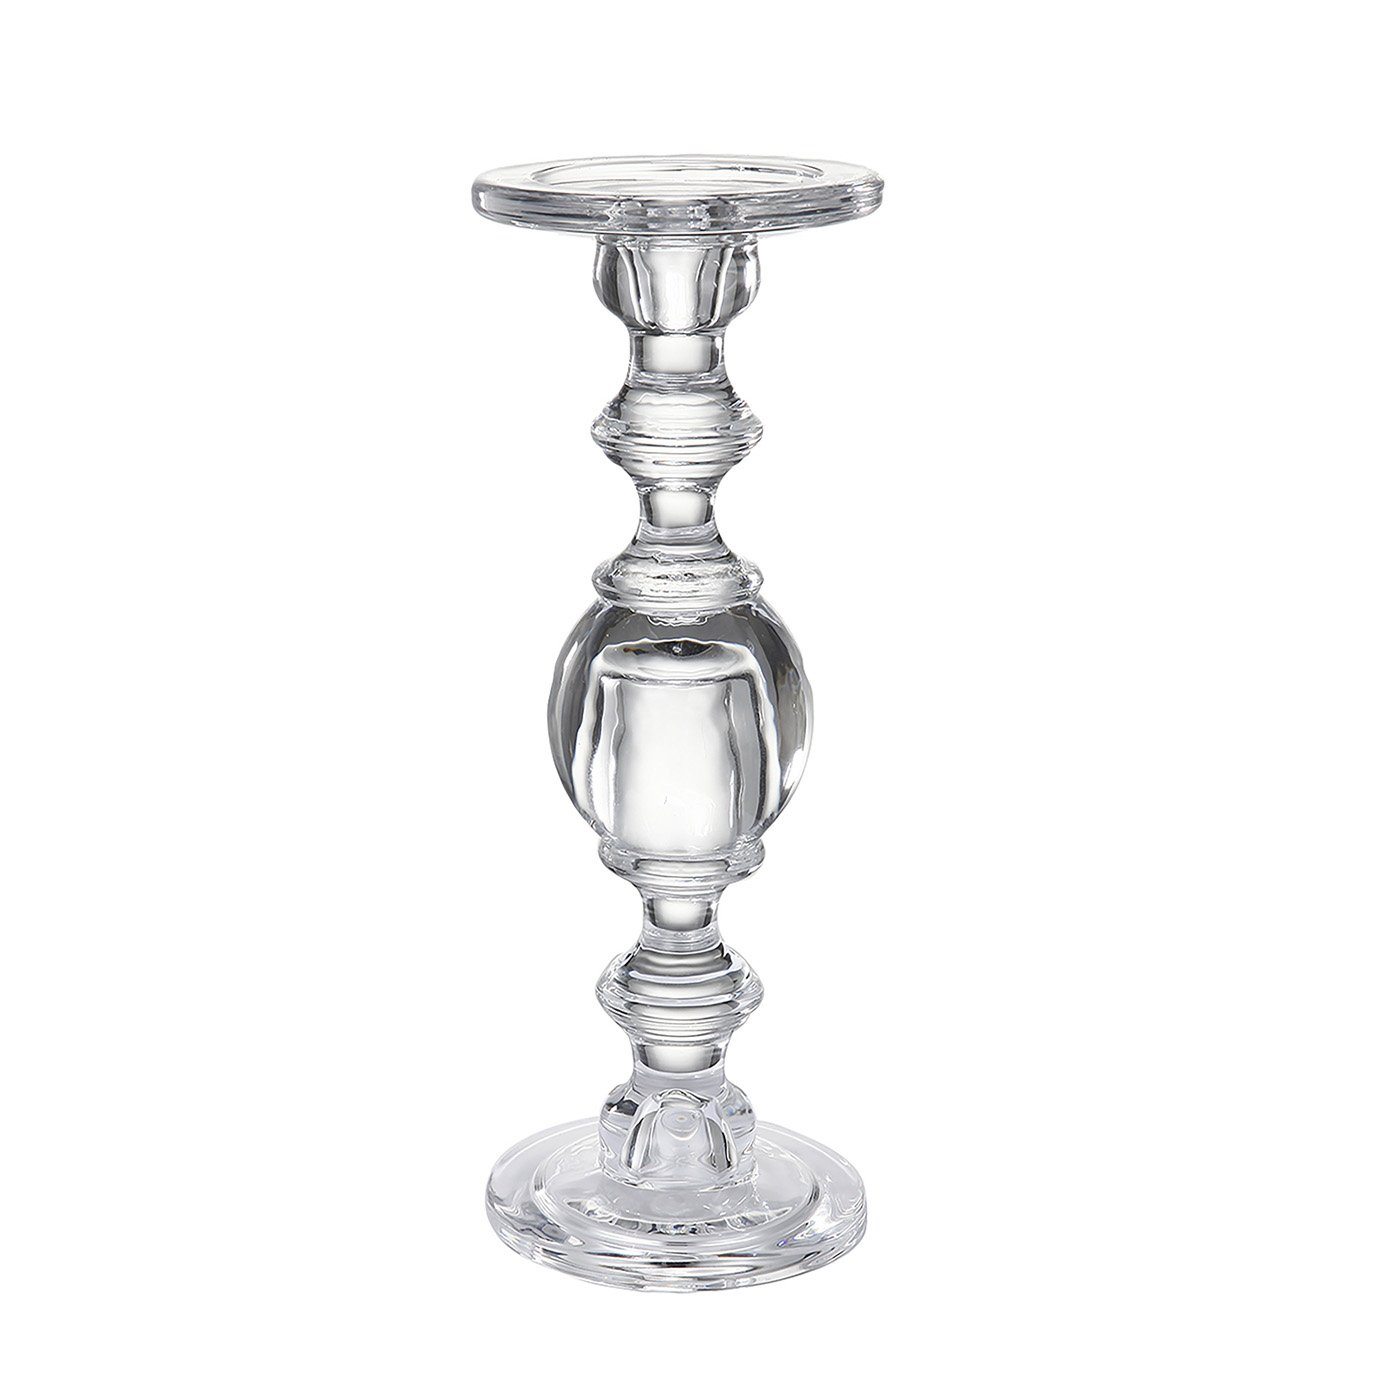 Sets - HUNTER 9 PC SET<br>Lamp, Spheres, Candle & Holders, Roses, Book